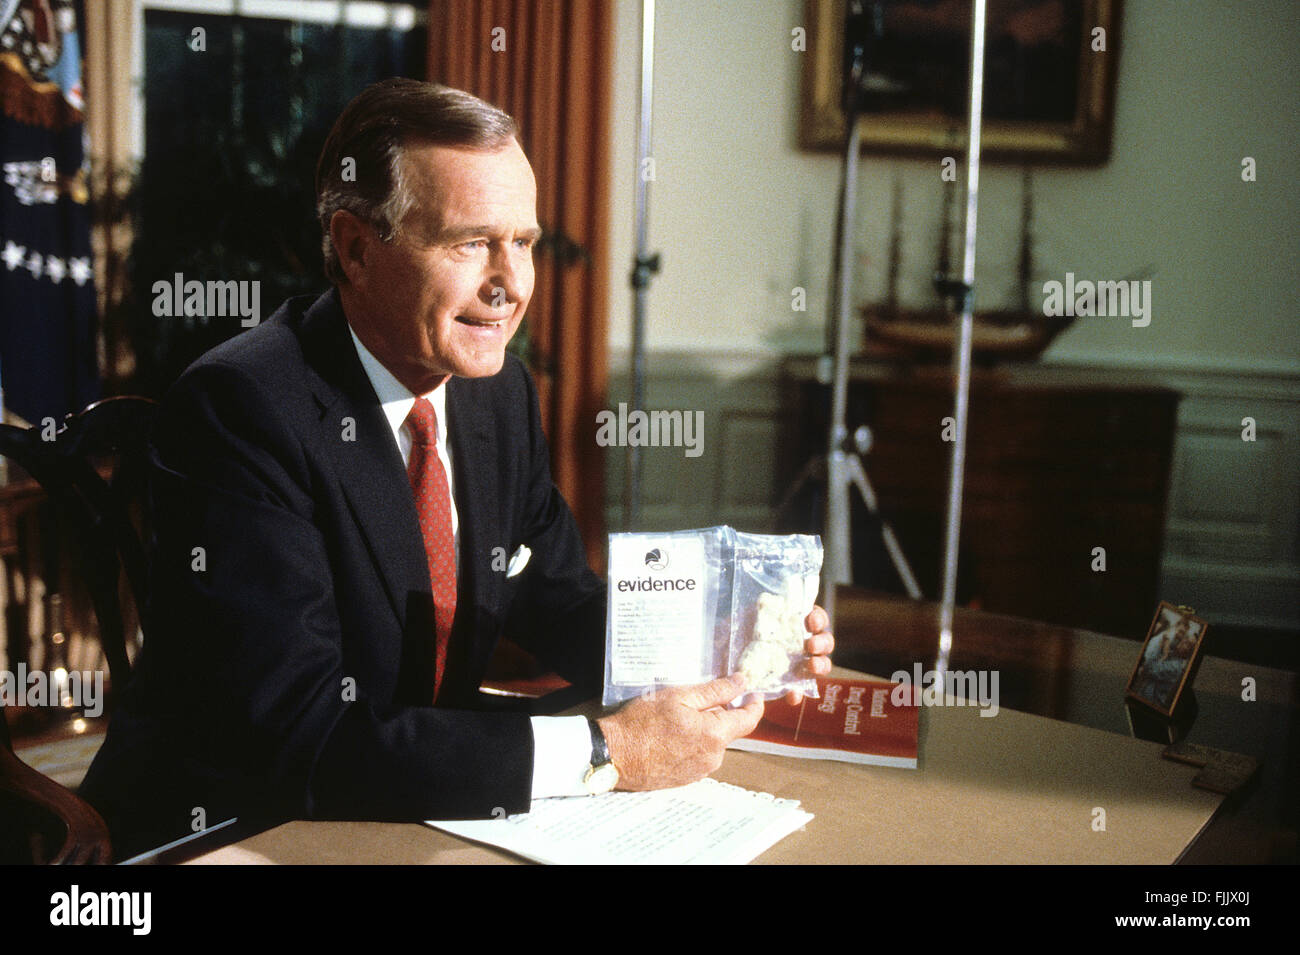 Washington, DC., 5th September, 1989 President George H.W. Bush holds up a bag of crack cocaine during his first address to the nation from the Oval Office. 'This is crack cocaine, it was seized a few days ago in a park across the street from the White House' he said showing how the drug trade had spread to even the president's own neighborhood. The three ounces of crack were purchased for $2,400 by  DEA agents from a drug dealer that they lured to Lafayette Park across the street from the White House.  Credit: Mark Reinstein Stock Photo